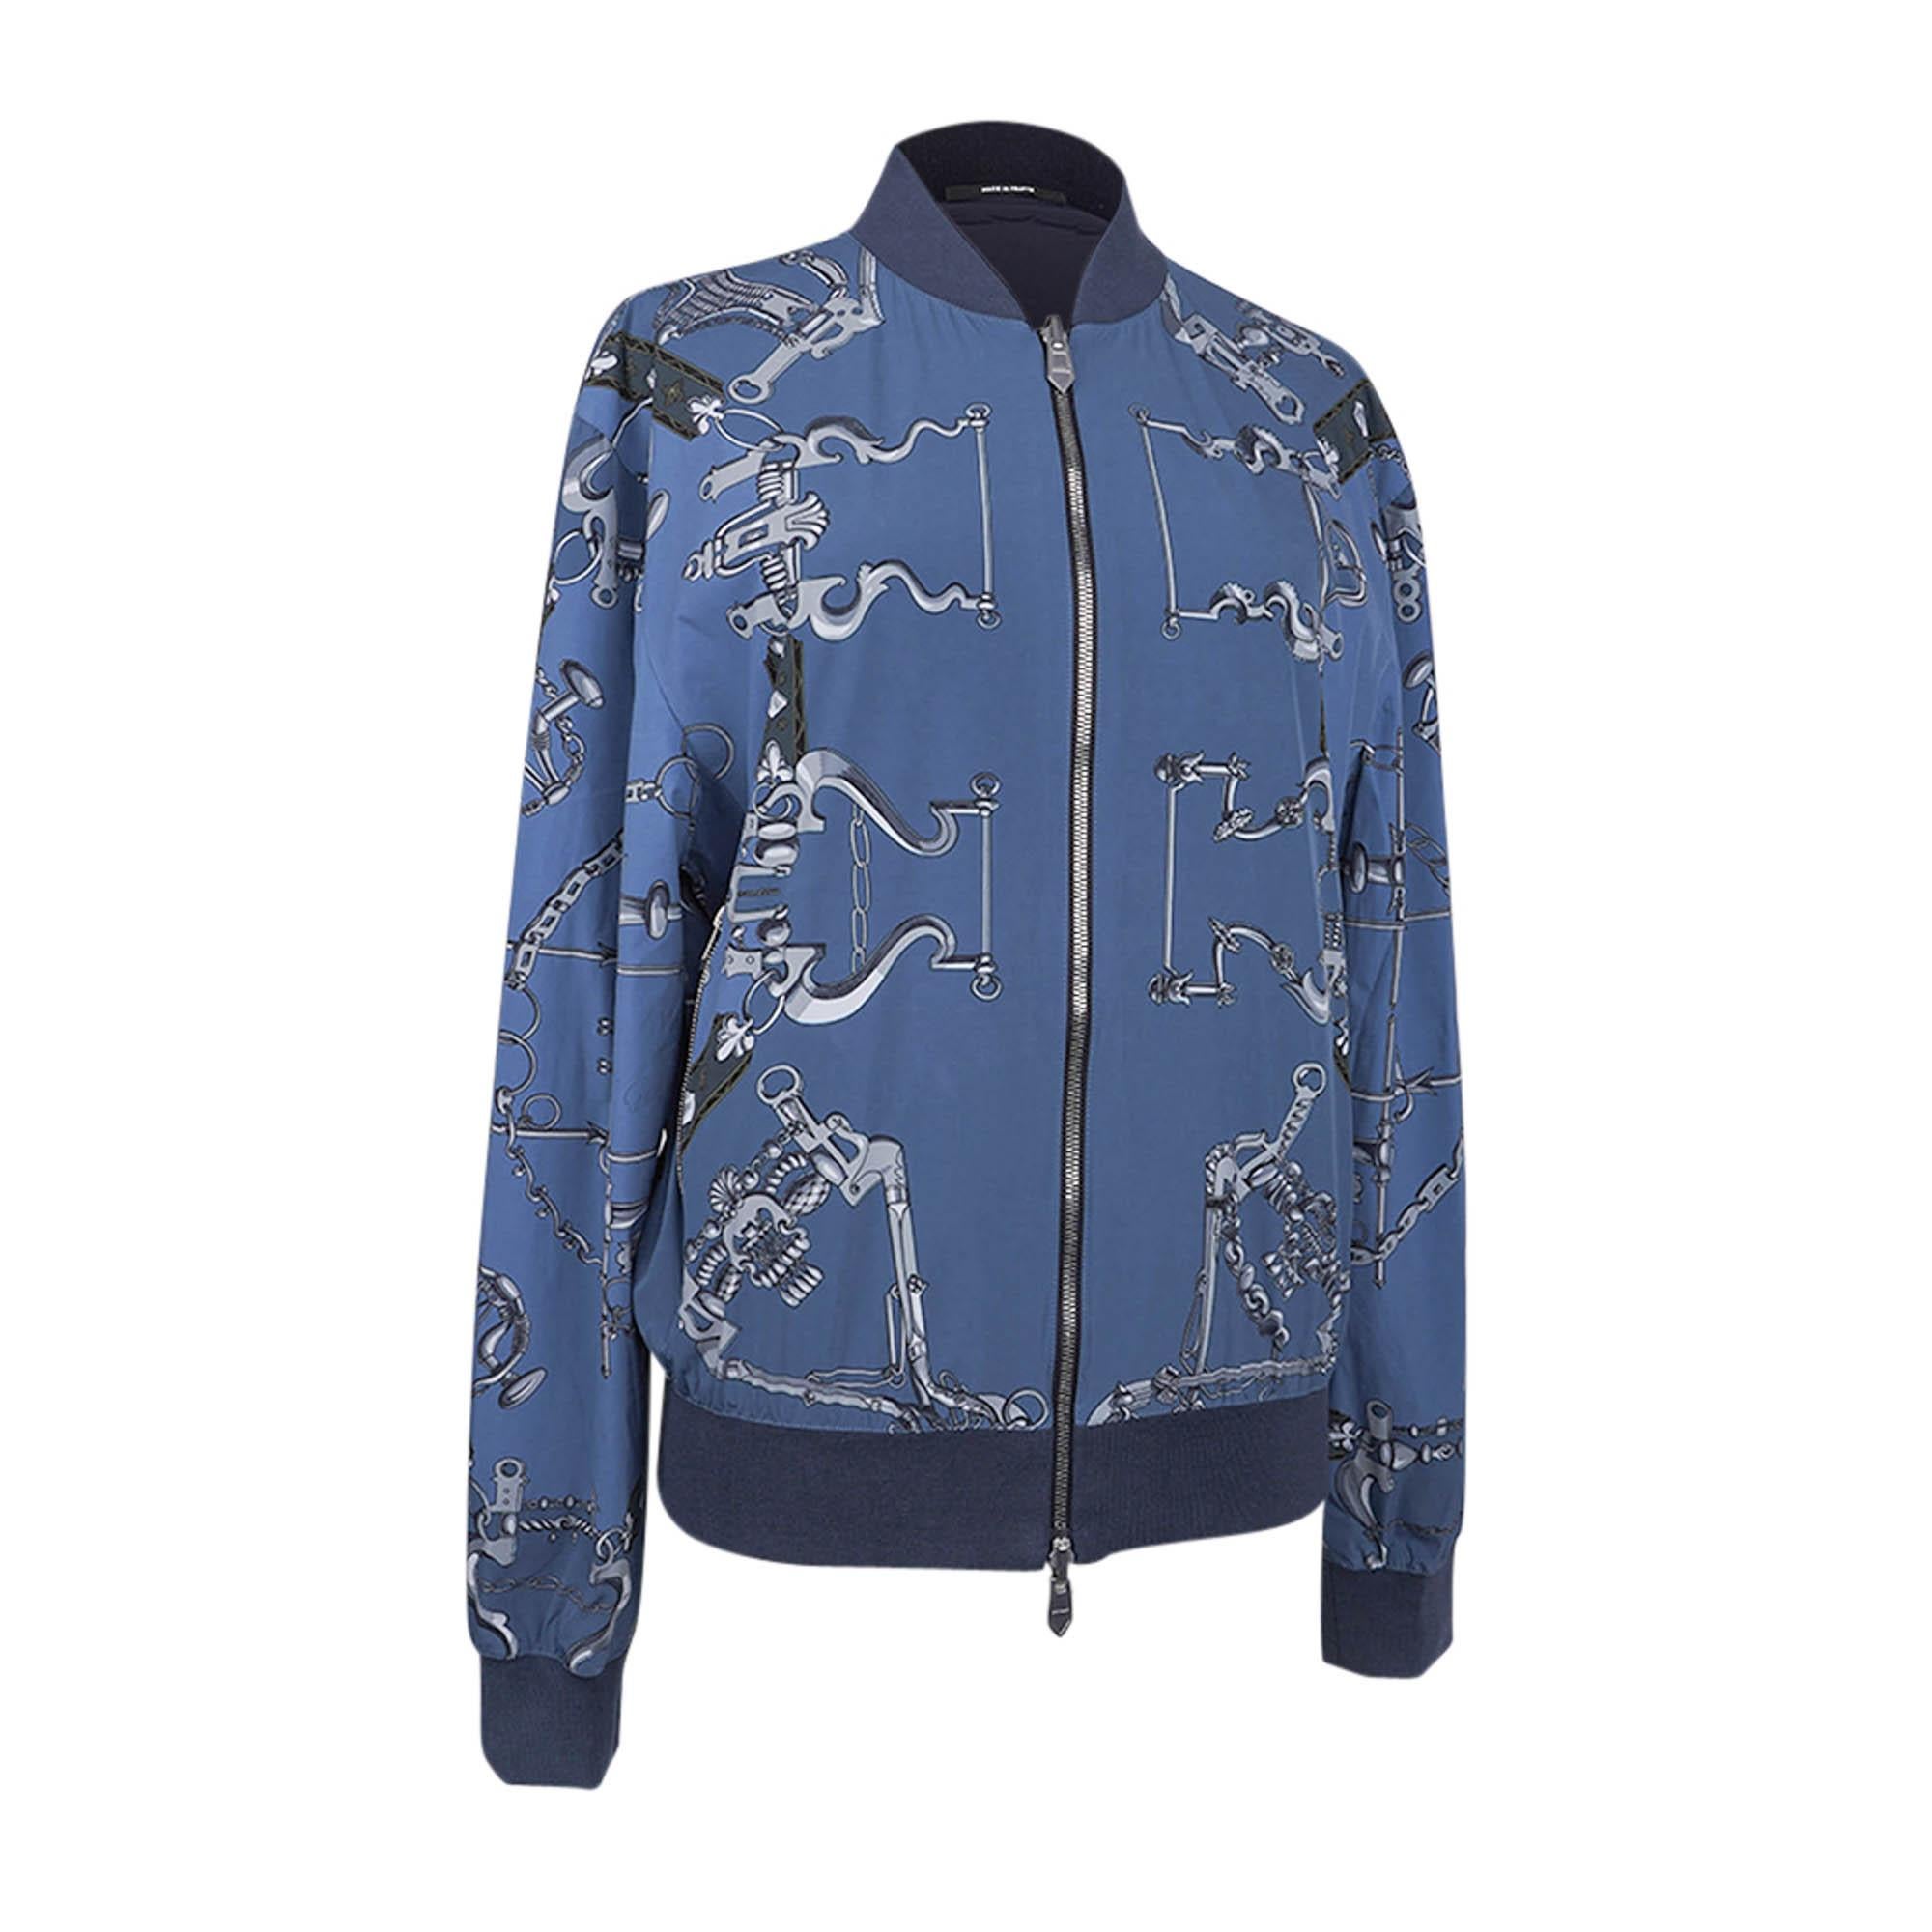 Mightychic offers an Hermes chic scarf print reversible silk men's windbreaker bomber style jacket.
The Blue and Grey rare Mors et Gourmettes print reverses to solid Marine.
Double zipper for closure.
Jacket has 2 exterior and 2 interior zip pockets